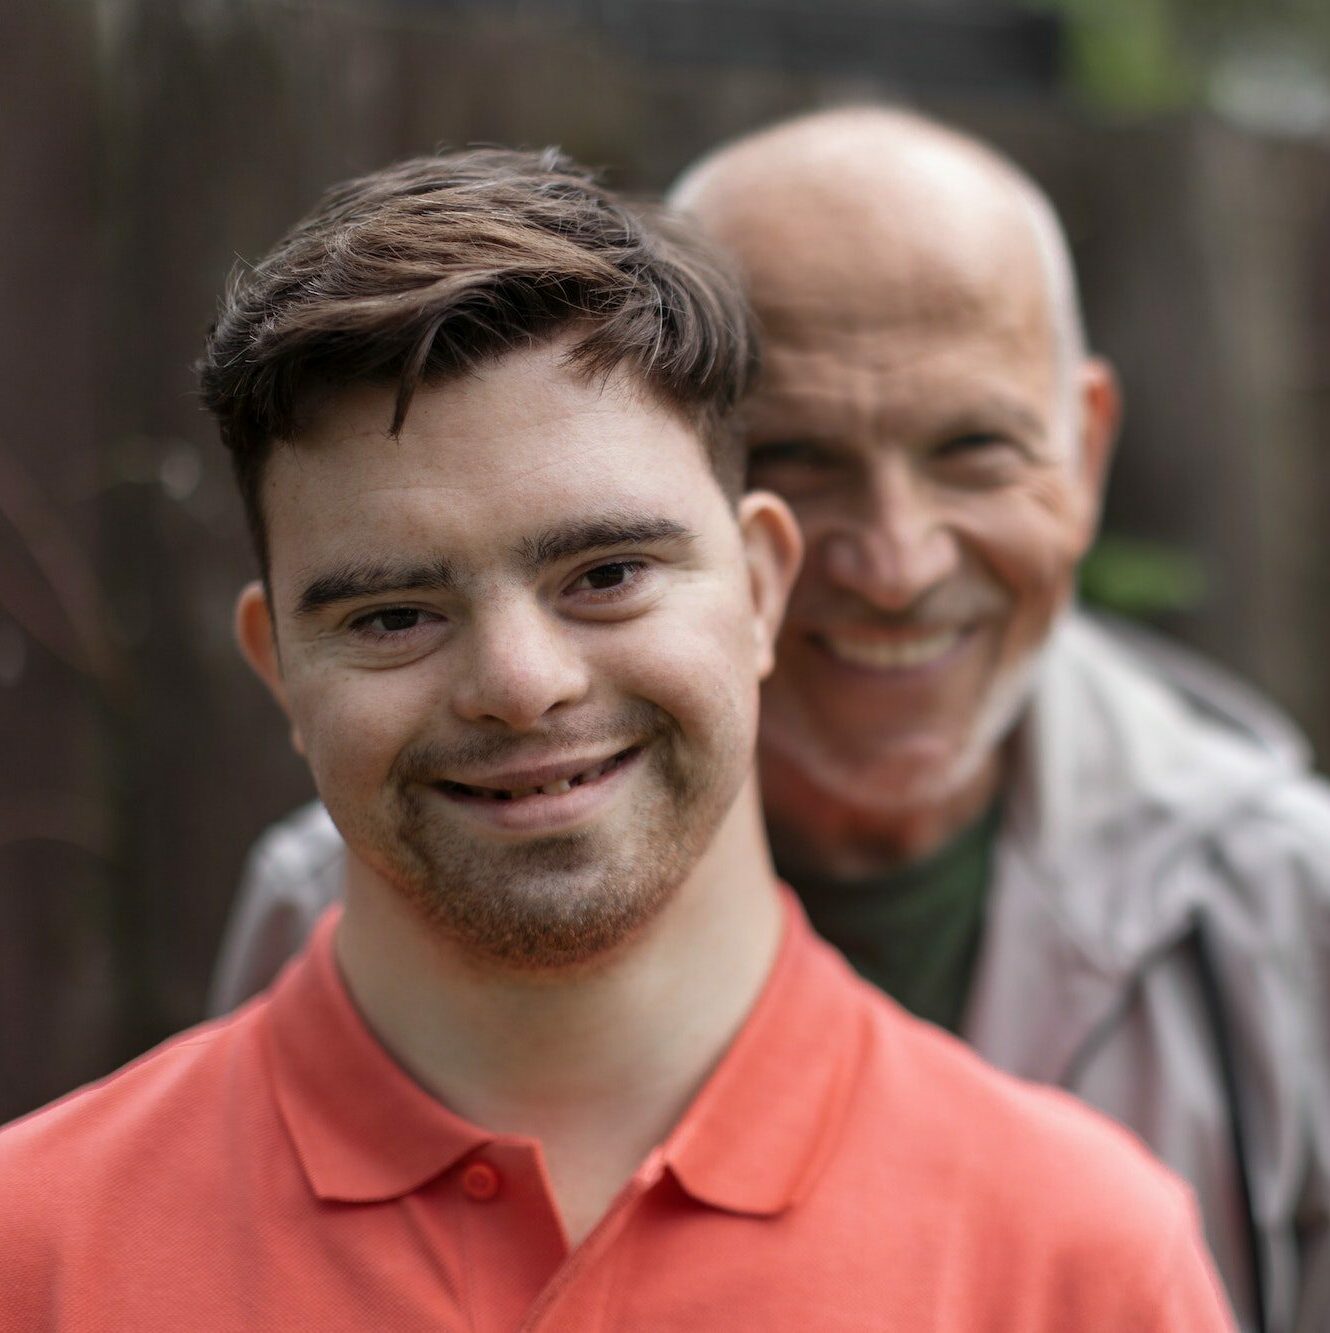 Portrait of happy senior father with his young son with Down syndrome outdoors.